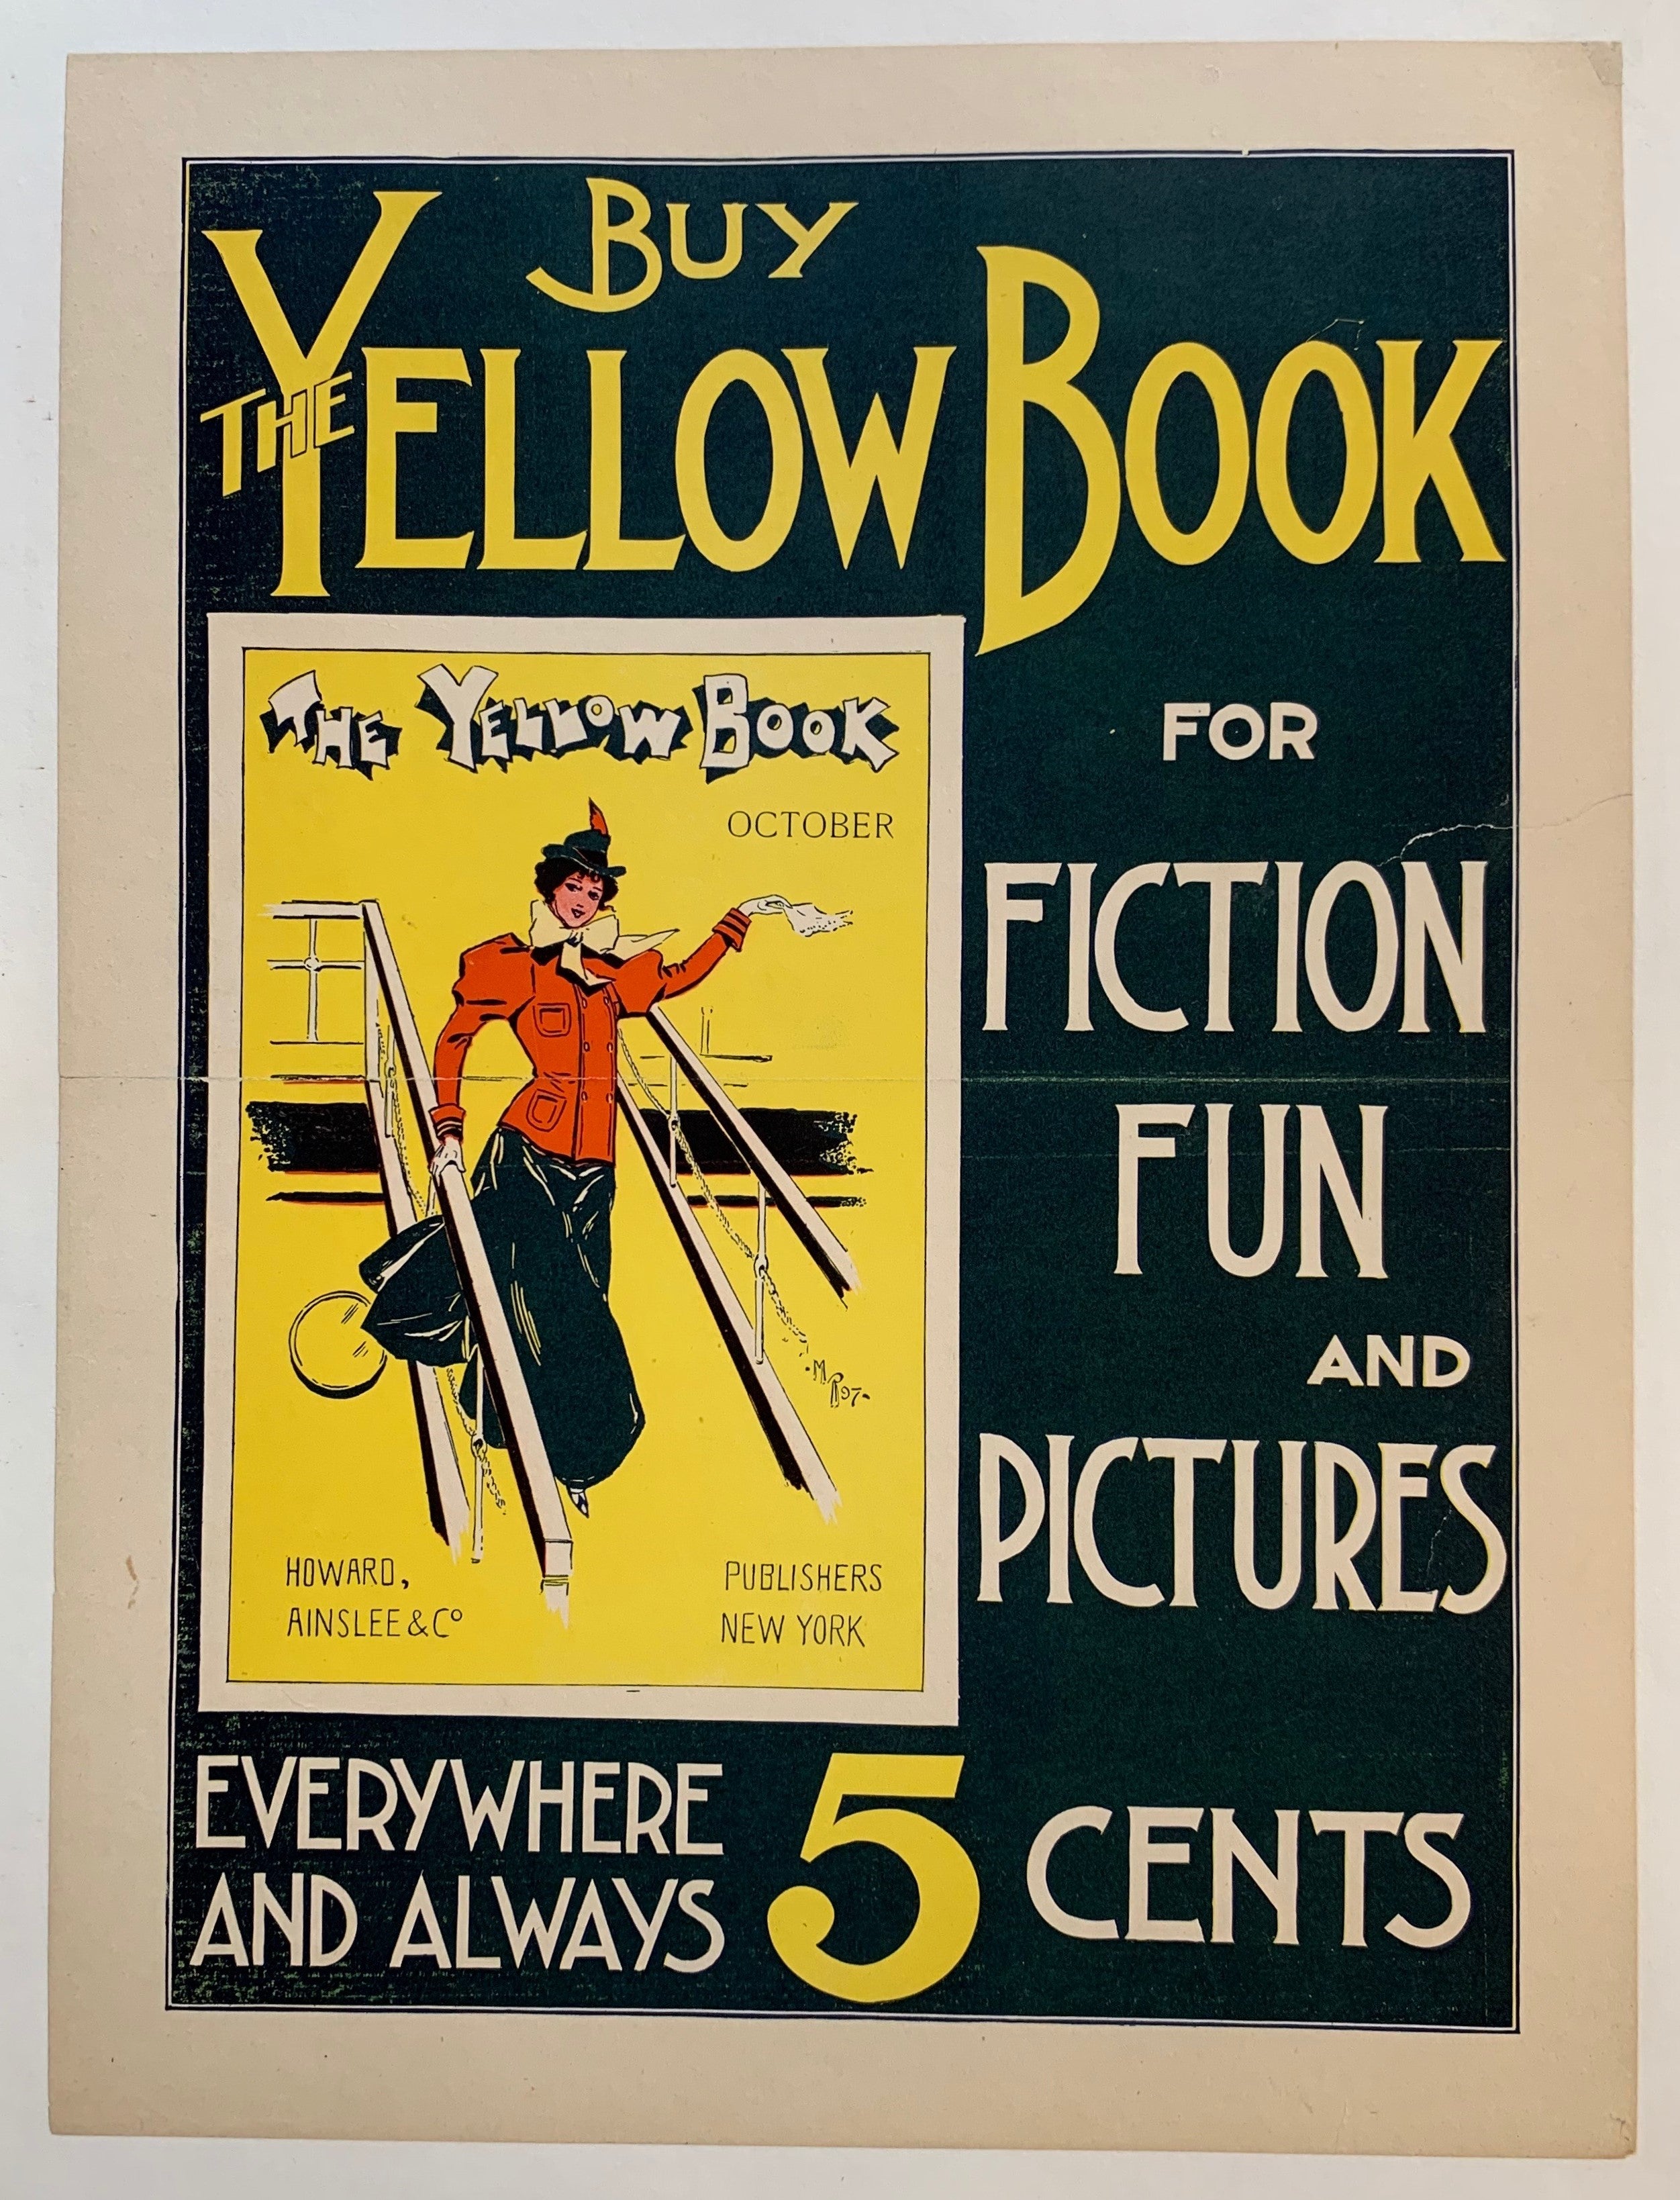 Buy The Yellow Book for Fiction Fun and Pictures